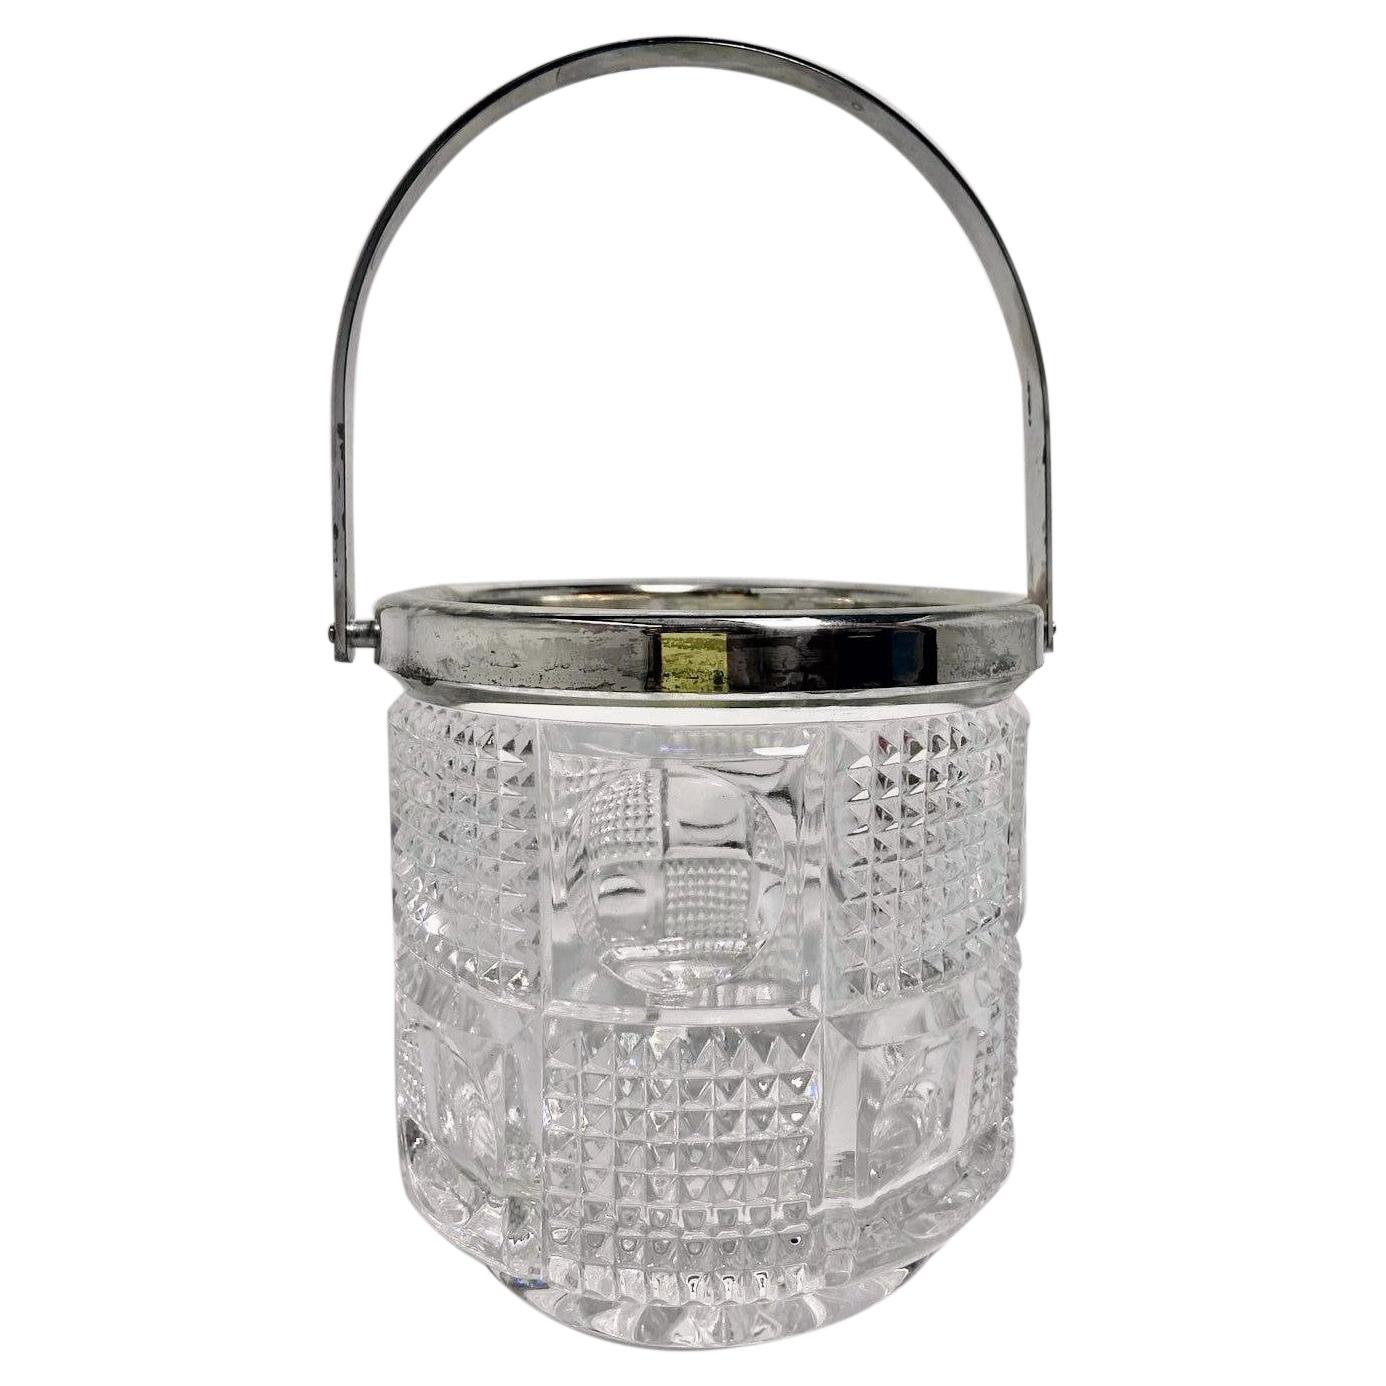 Small Vintage Silver-Plate and Crystal Glass Ice Bucket, Circa 1940-1950